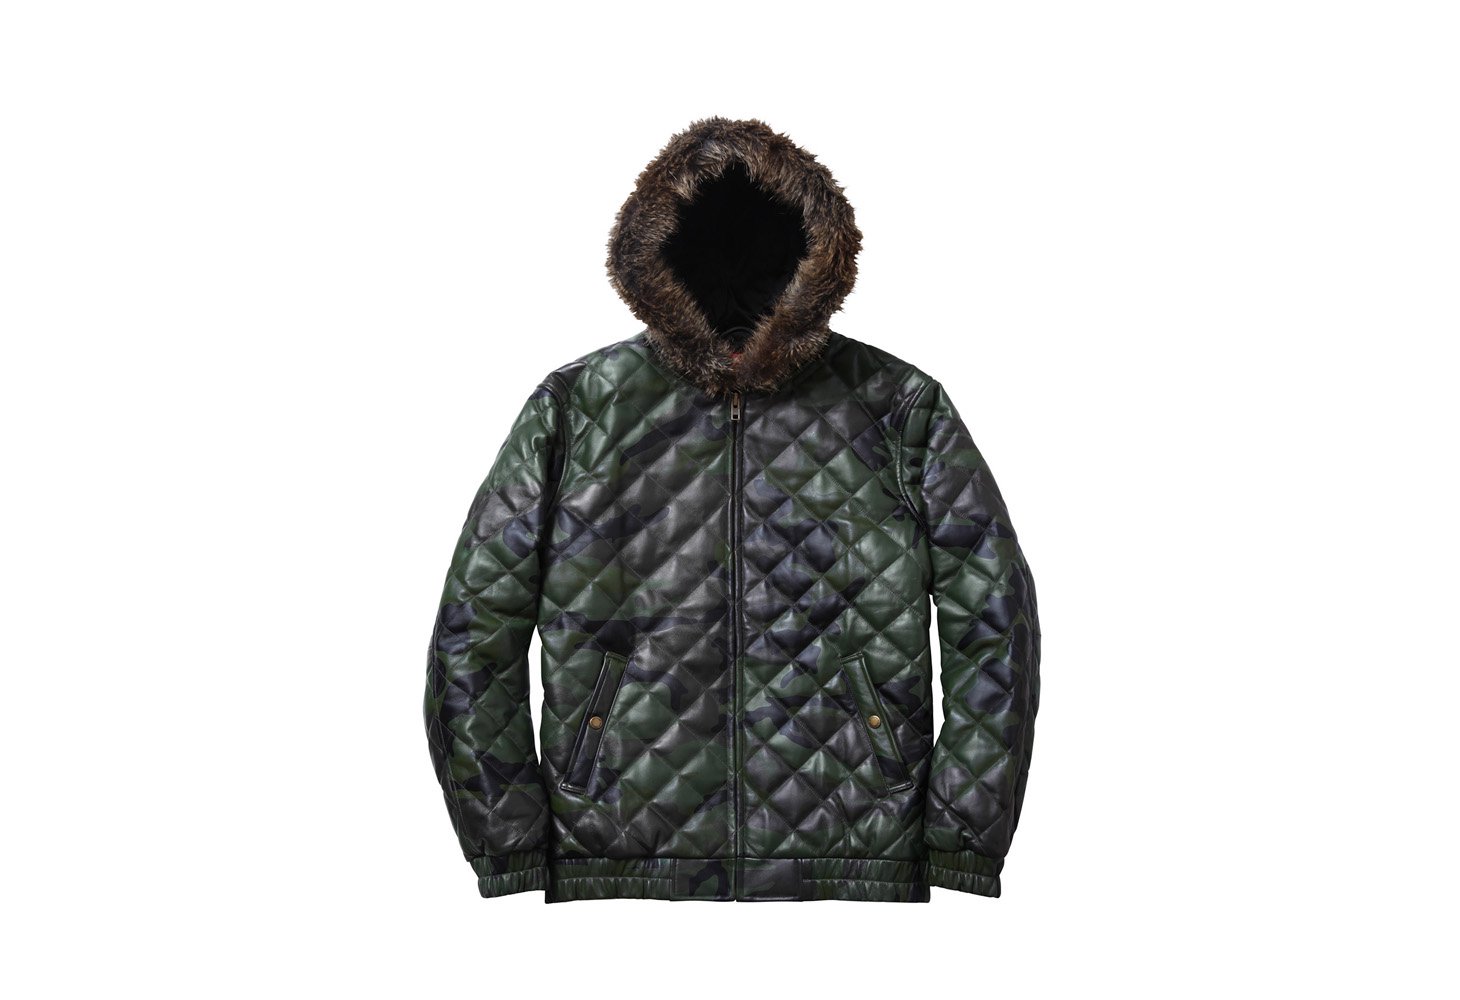 Supreme Quilted Leather Hooded Jaket